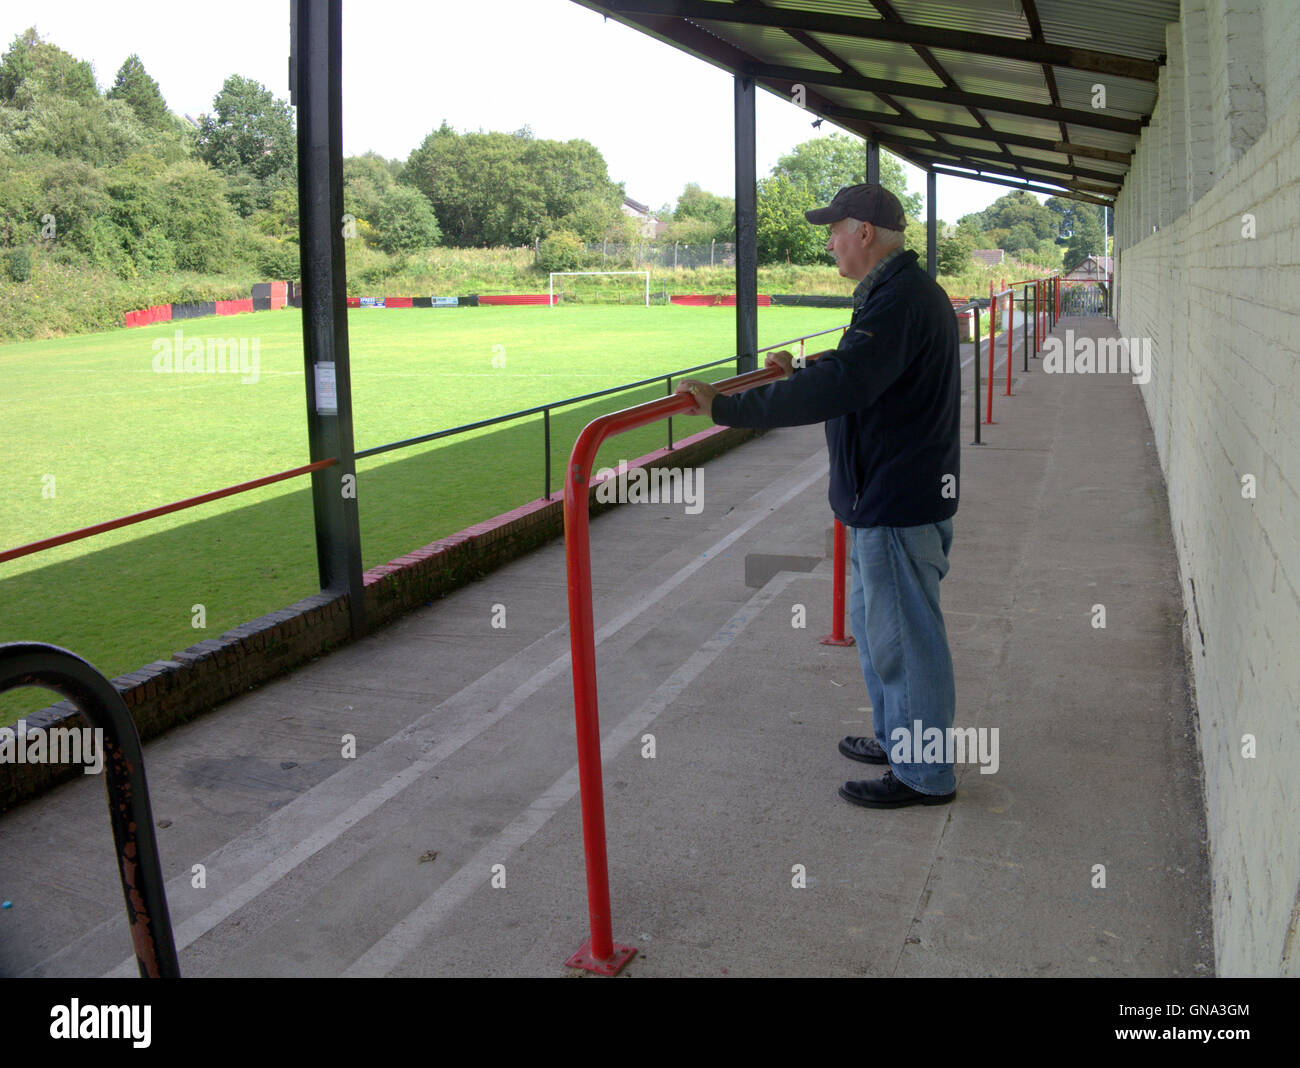 Glasgow, Scotland, UK 29th August 2016. Drumchapel Amateur F.C.privided the humble beginnings of Sir Alex Ferguson, David Moyes and Andy Gray yet play at Glenhead Park, Duntocher. An interesting contrast to the stadiums they graduated to later in their careers. © Gerard Ferry/Alamy Live News Stock Photo